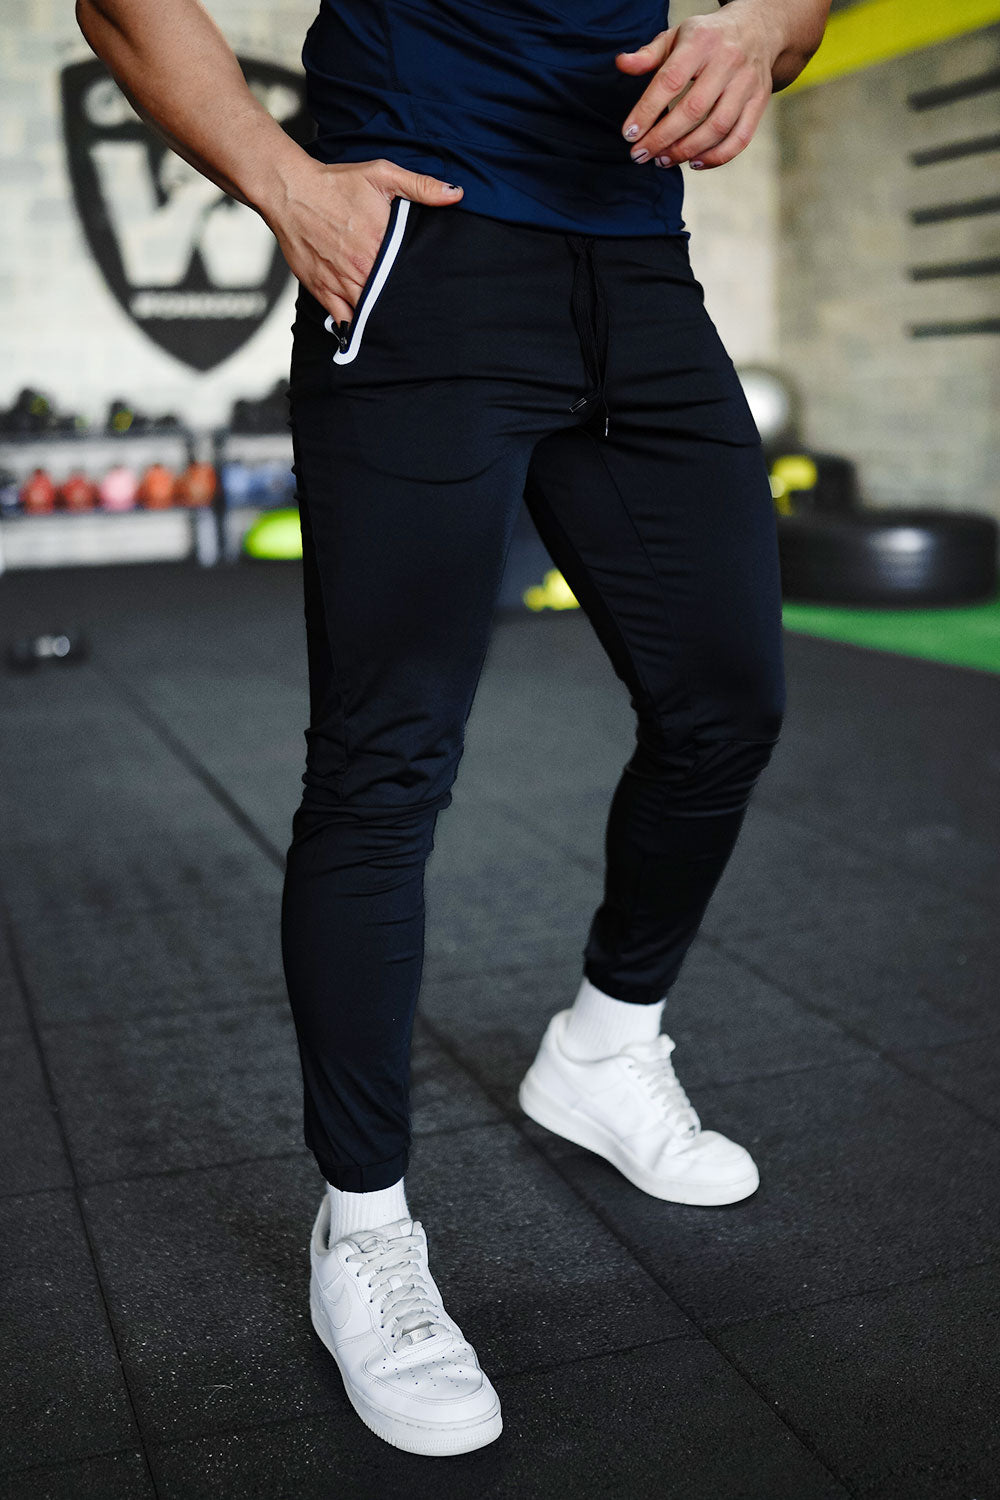 Mens Tapered Joggers Pants Lightweight Slim Fit Running Pants for Men Casual -BLACK